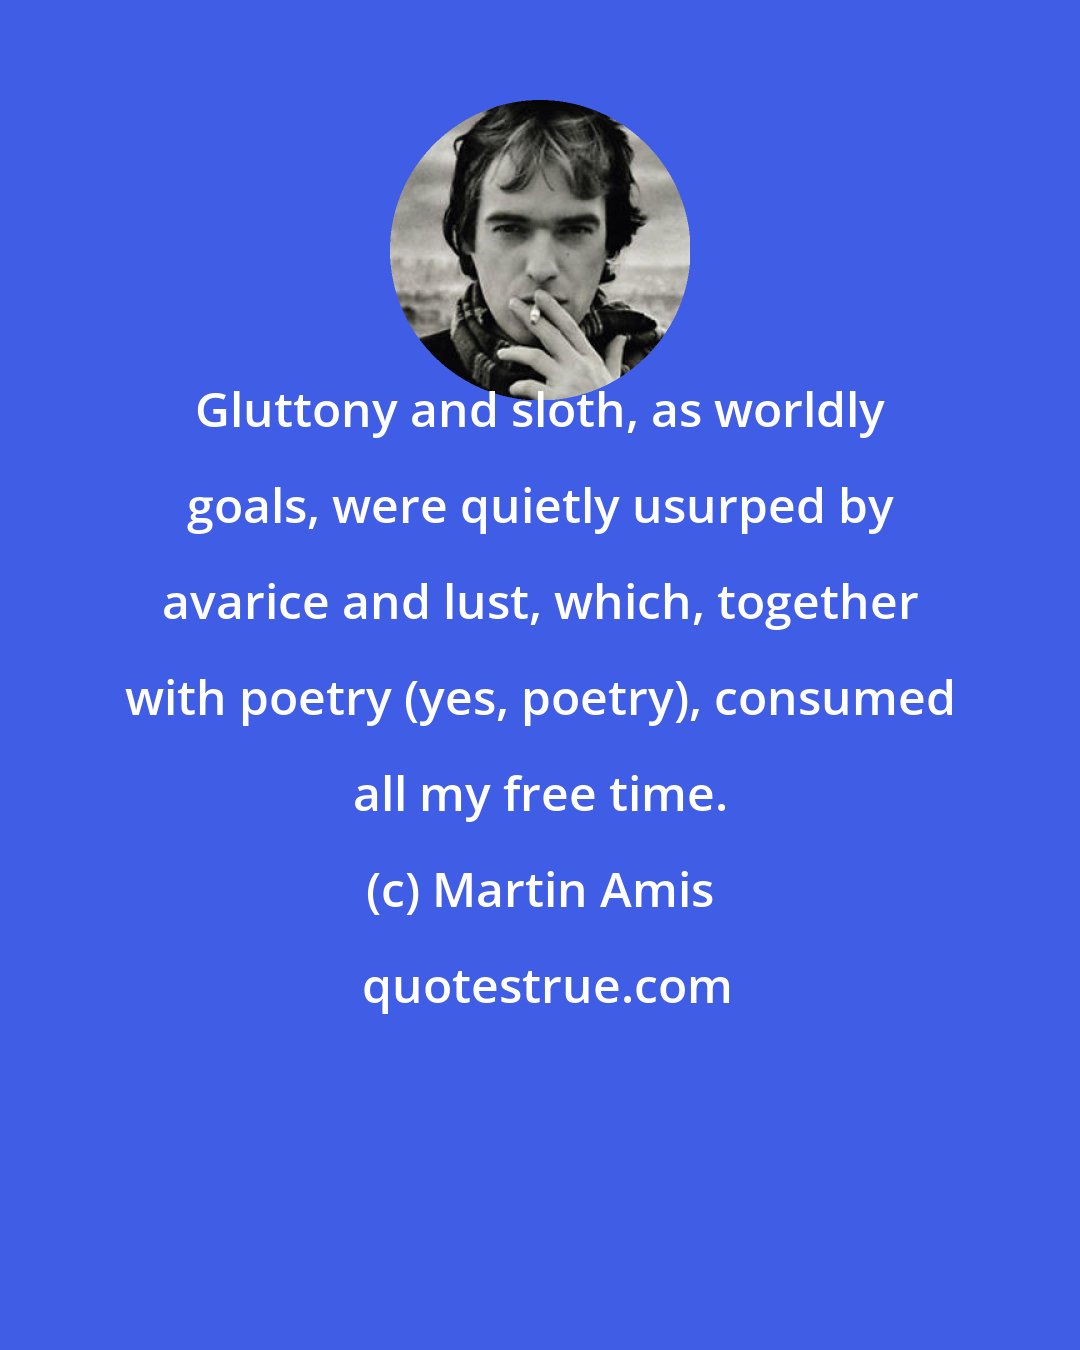 Martin Amis: Gluttony and sloth, as worldly goals, were quietly usurped by avarice and lust, which, together with poetry (yes, poetry), consumed all my free time.